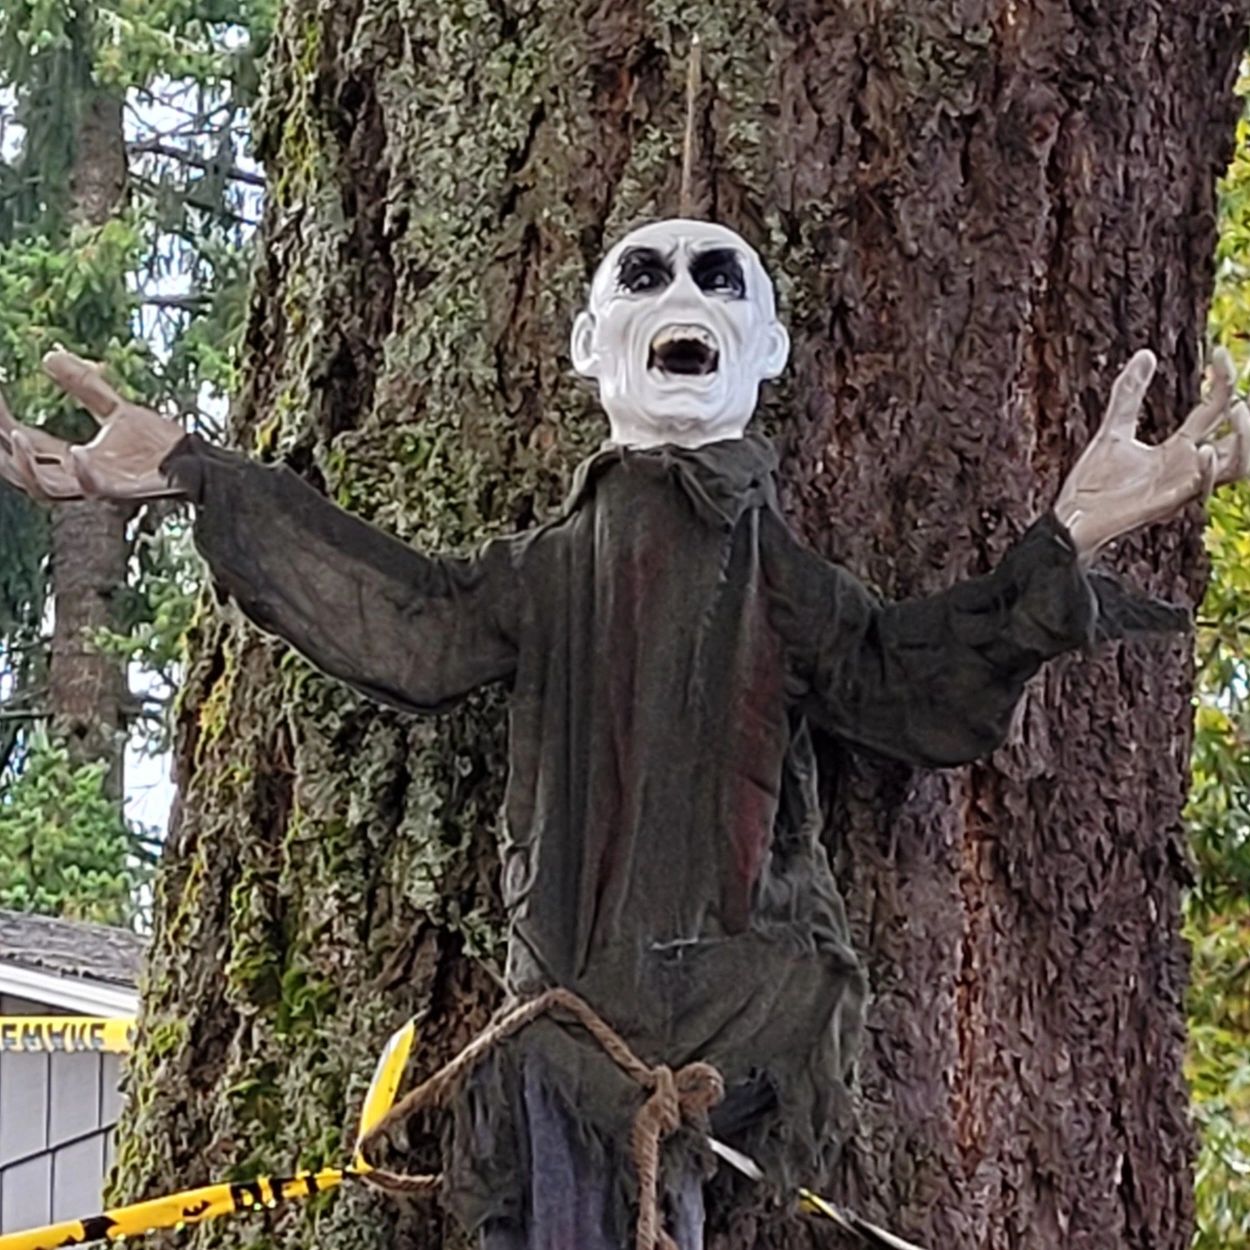 ghoul figure tied to tree